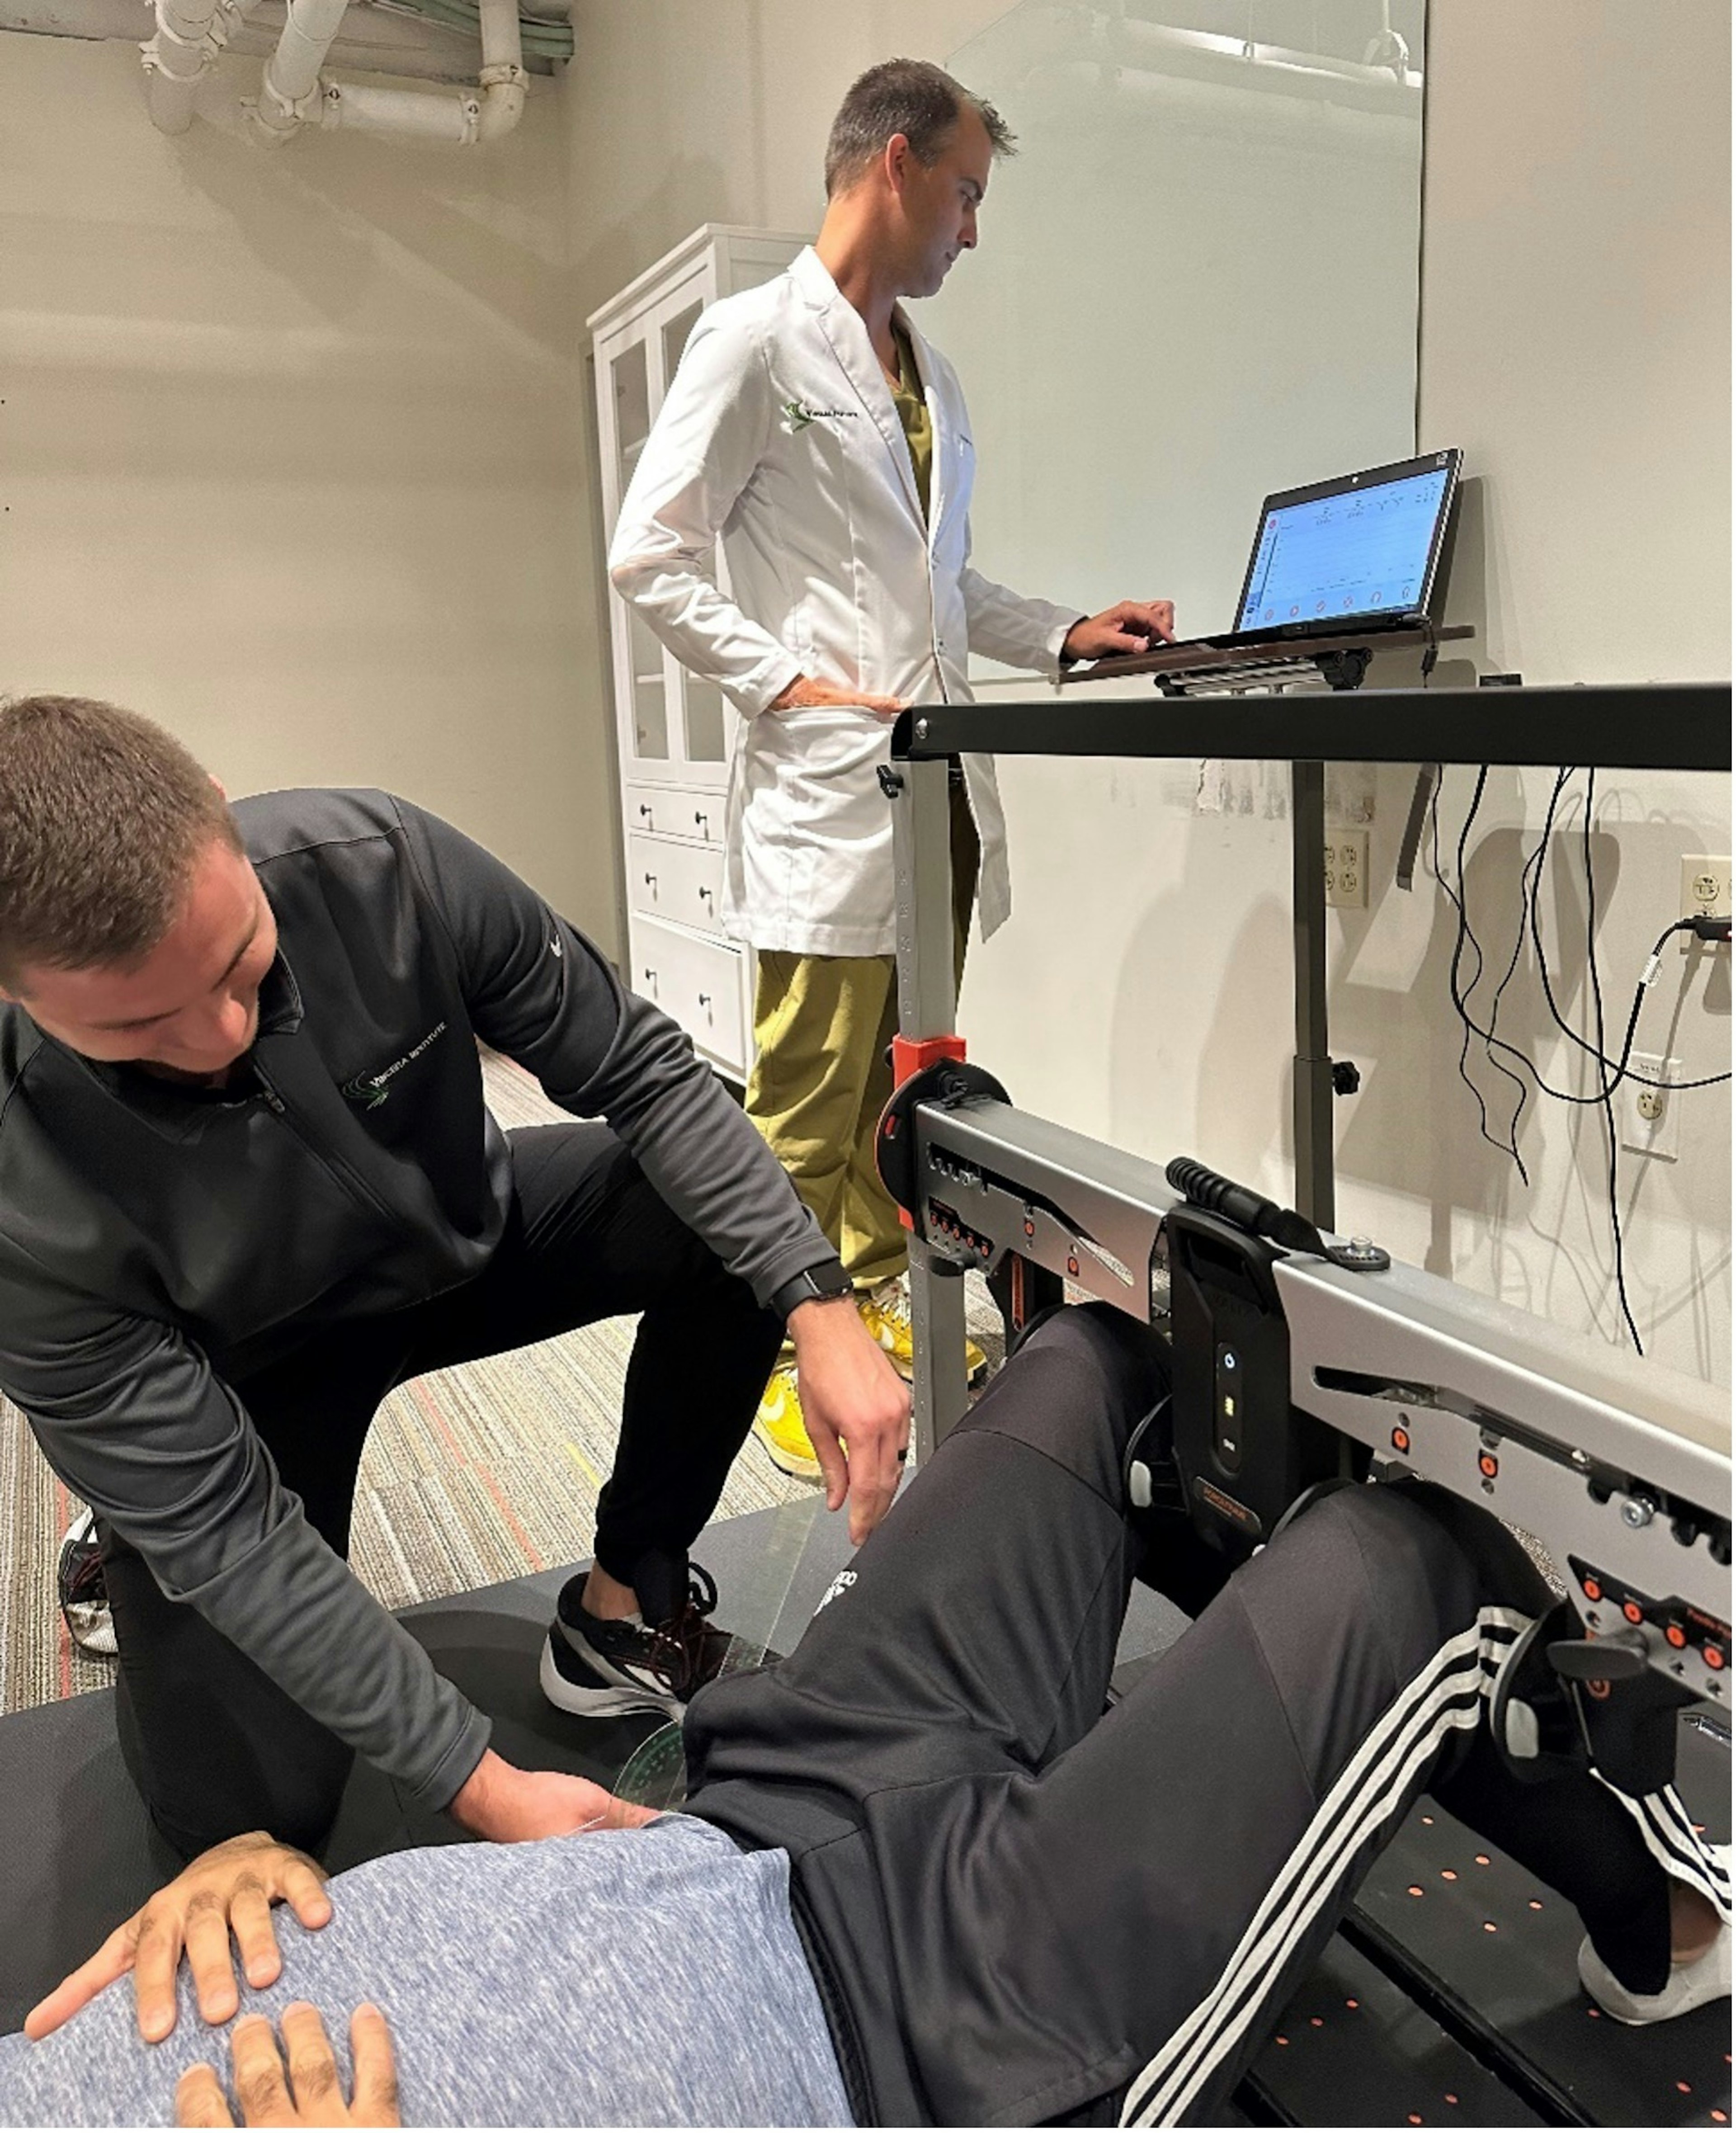 Dr. Poor (right) and Clark Bingol (left; athletic trainer) conducting abduction : adduction testing on ForceFrame.